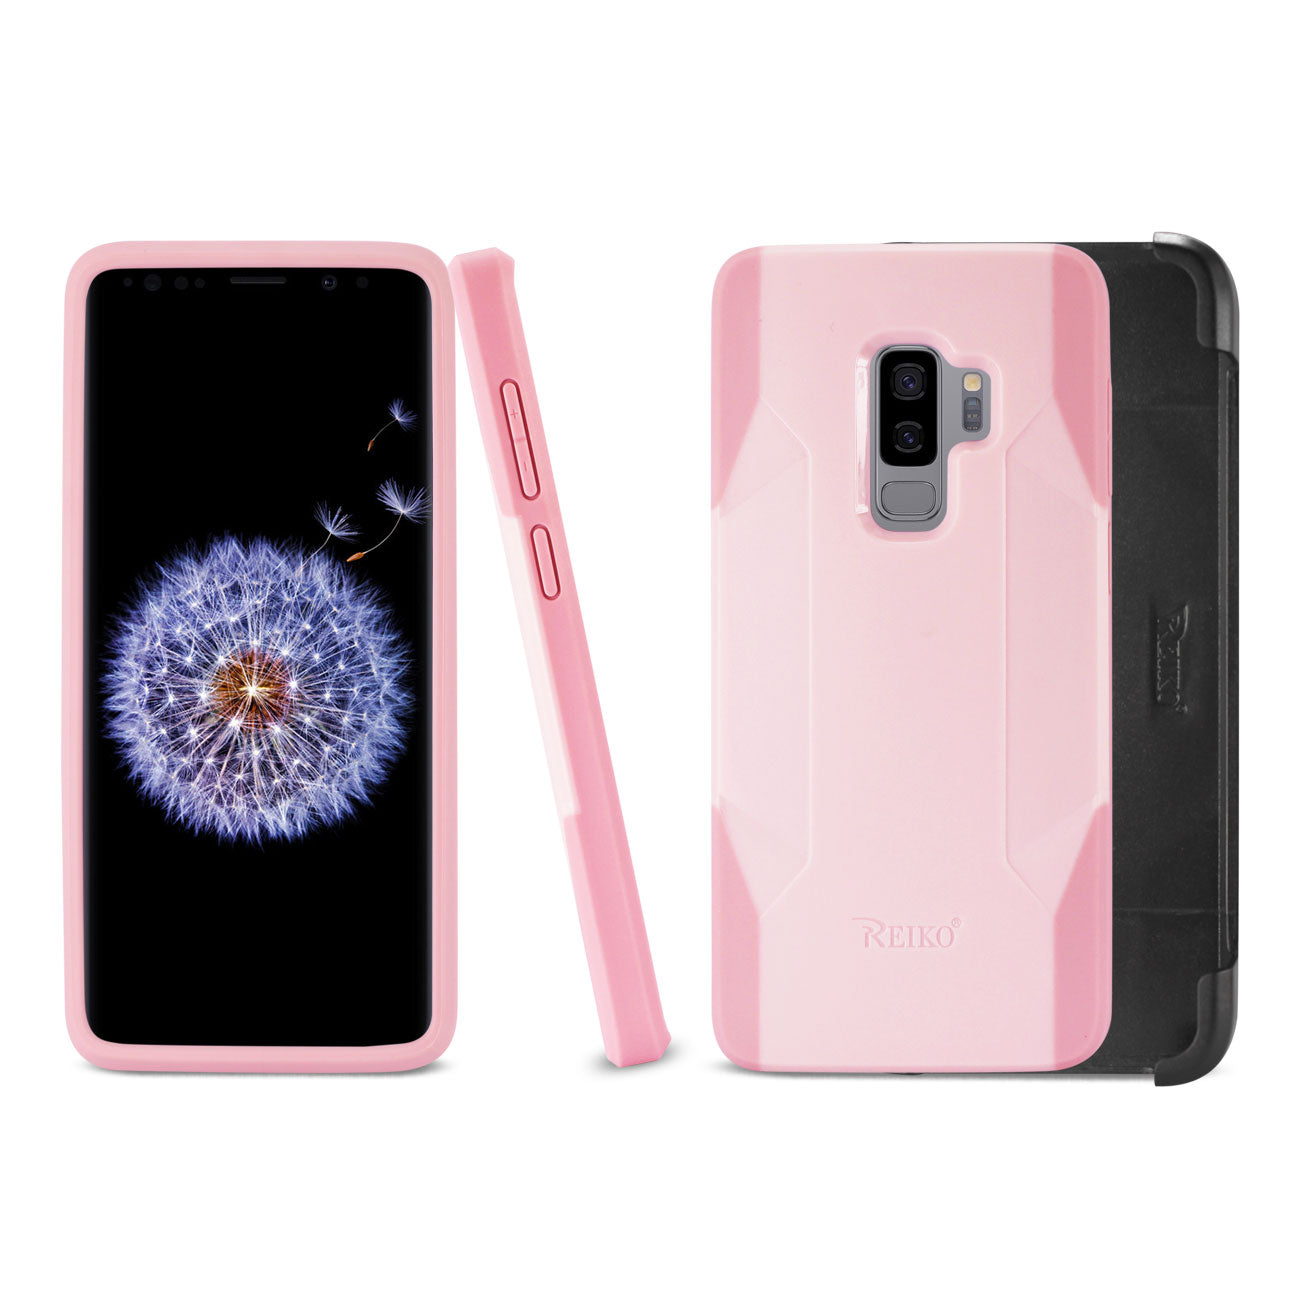 Reiko Samsung Galaxy S9 Plus 3-In-1 Hybrid Heavy Duty Holster Combo Case In Light Pink